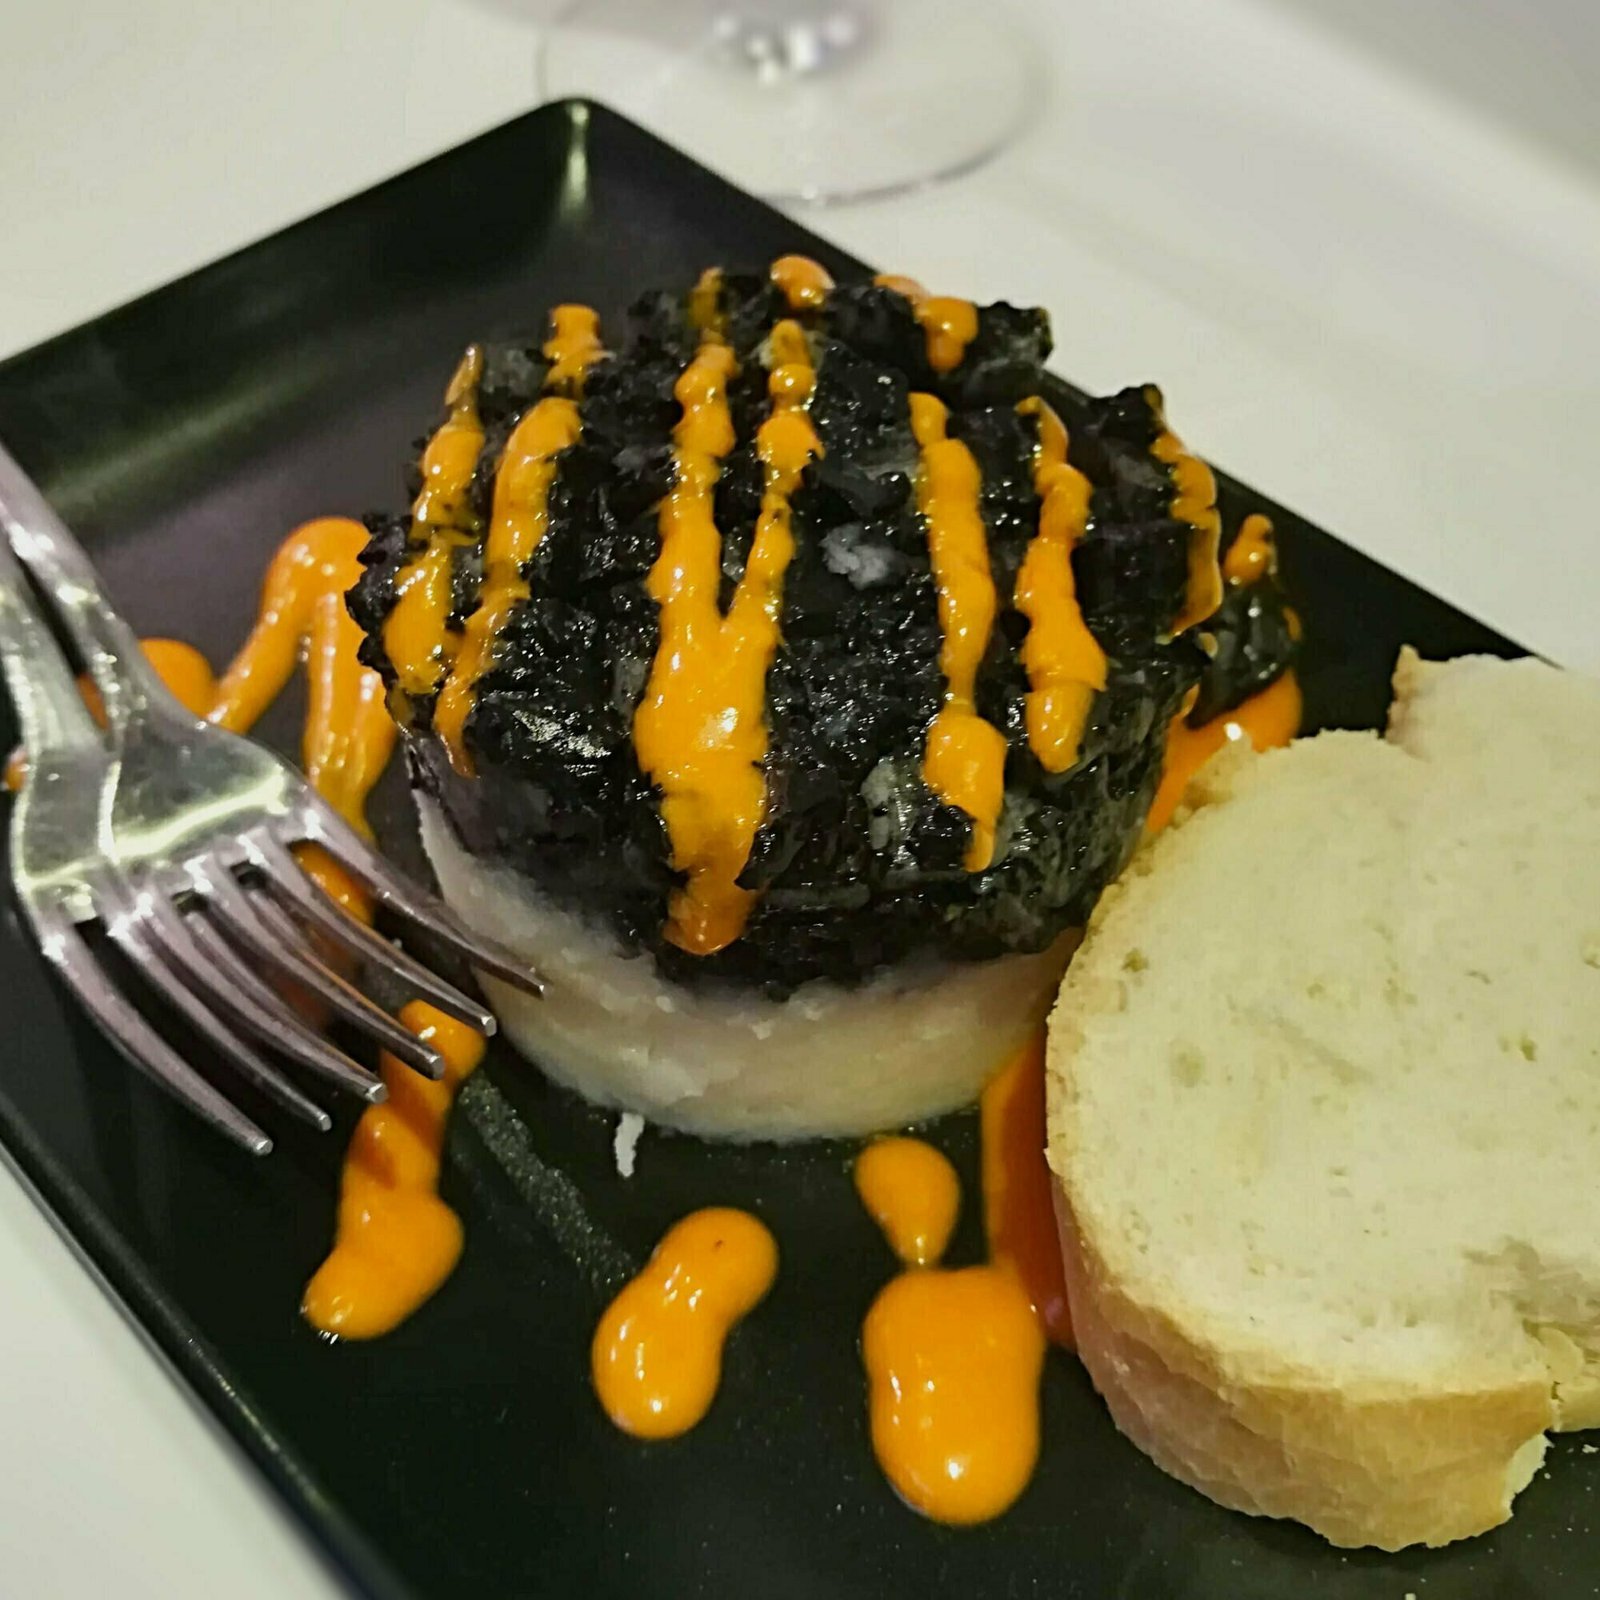 A tapa of morcilla served on a slice of white bread with a spicy sauce.